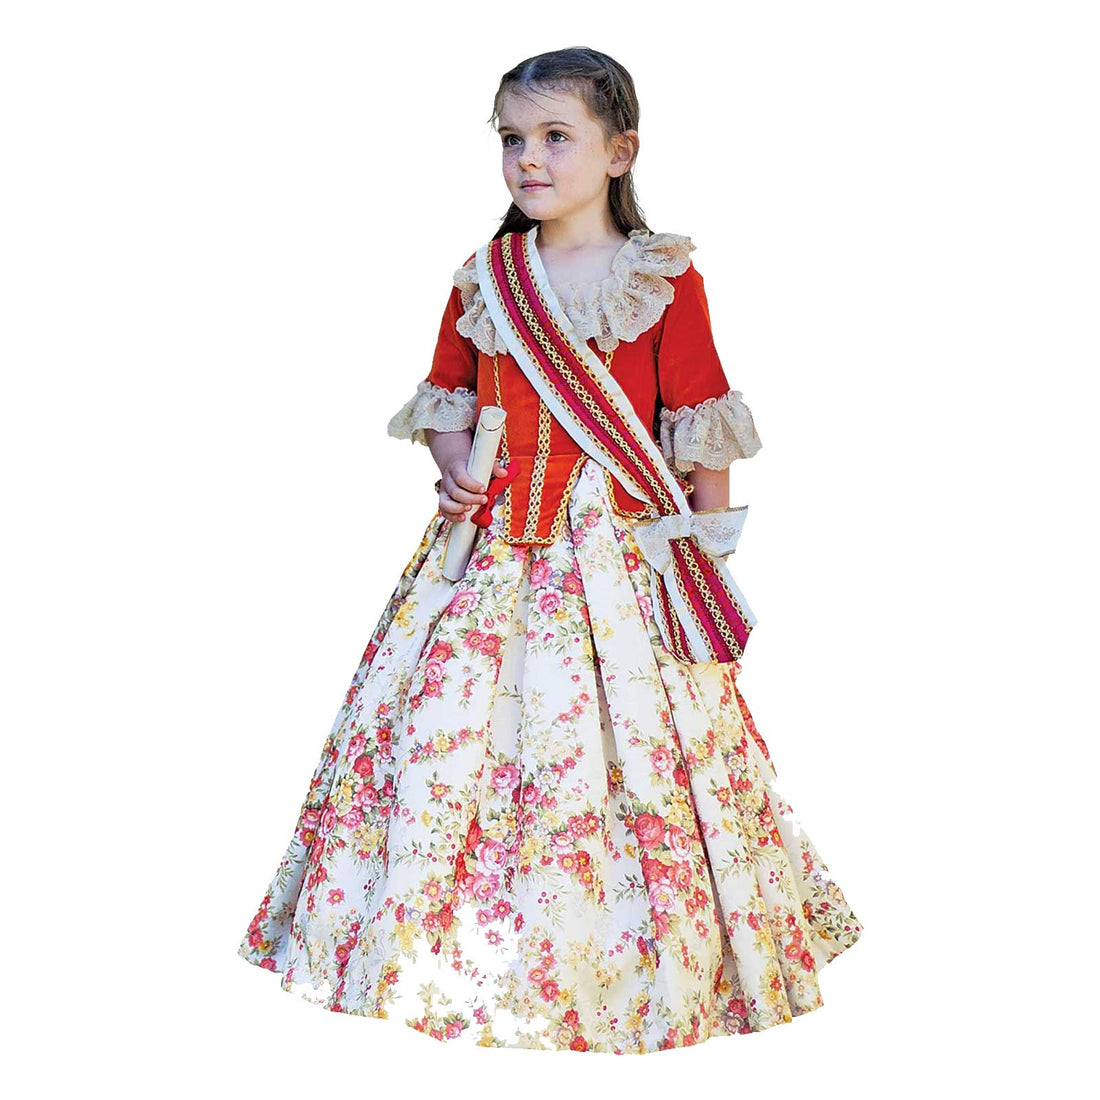 Floral RED Child Costume Set with Flotral Countess Theme (6-8 Years)